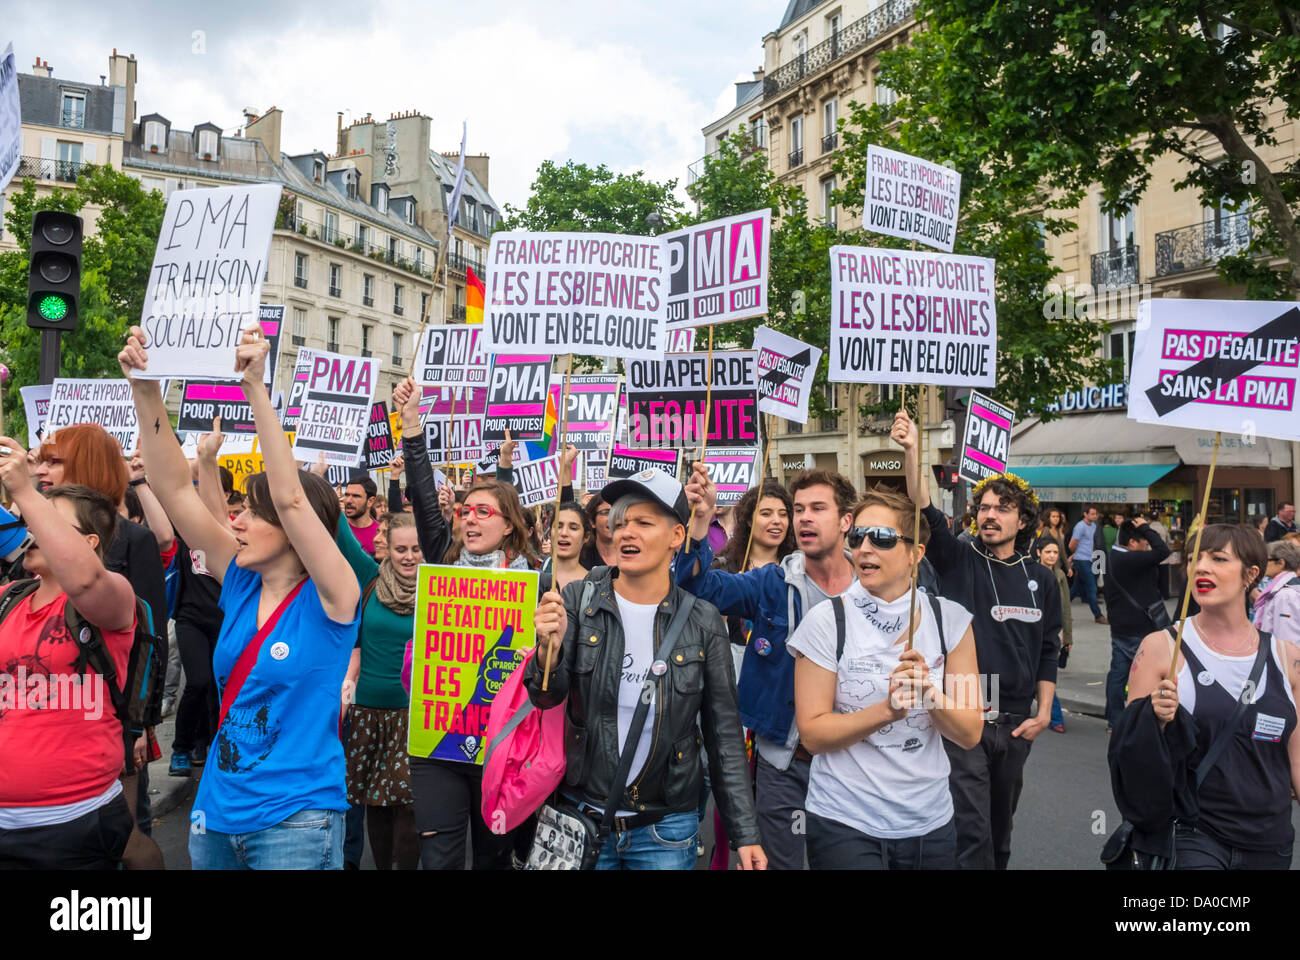 Paris, France, Large Crowd People, LGBT Groups Protesting in Annual Gay Pride March, 'Oui, OUi, Oui, (Collective) Holding Signs in Support of Legalizing Surrogate Motherhood Rights (PMA) gay rights struggle, young lesbians and gay men Stock Photo